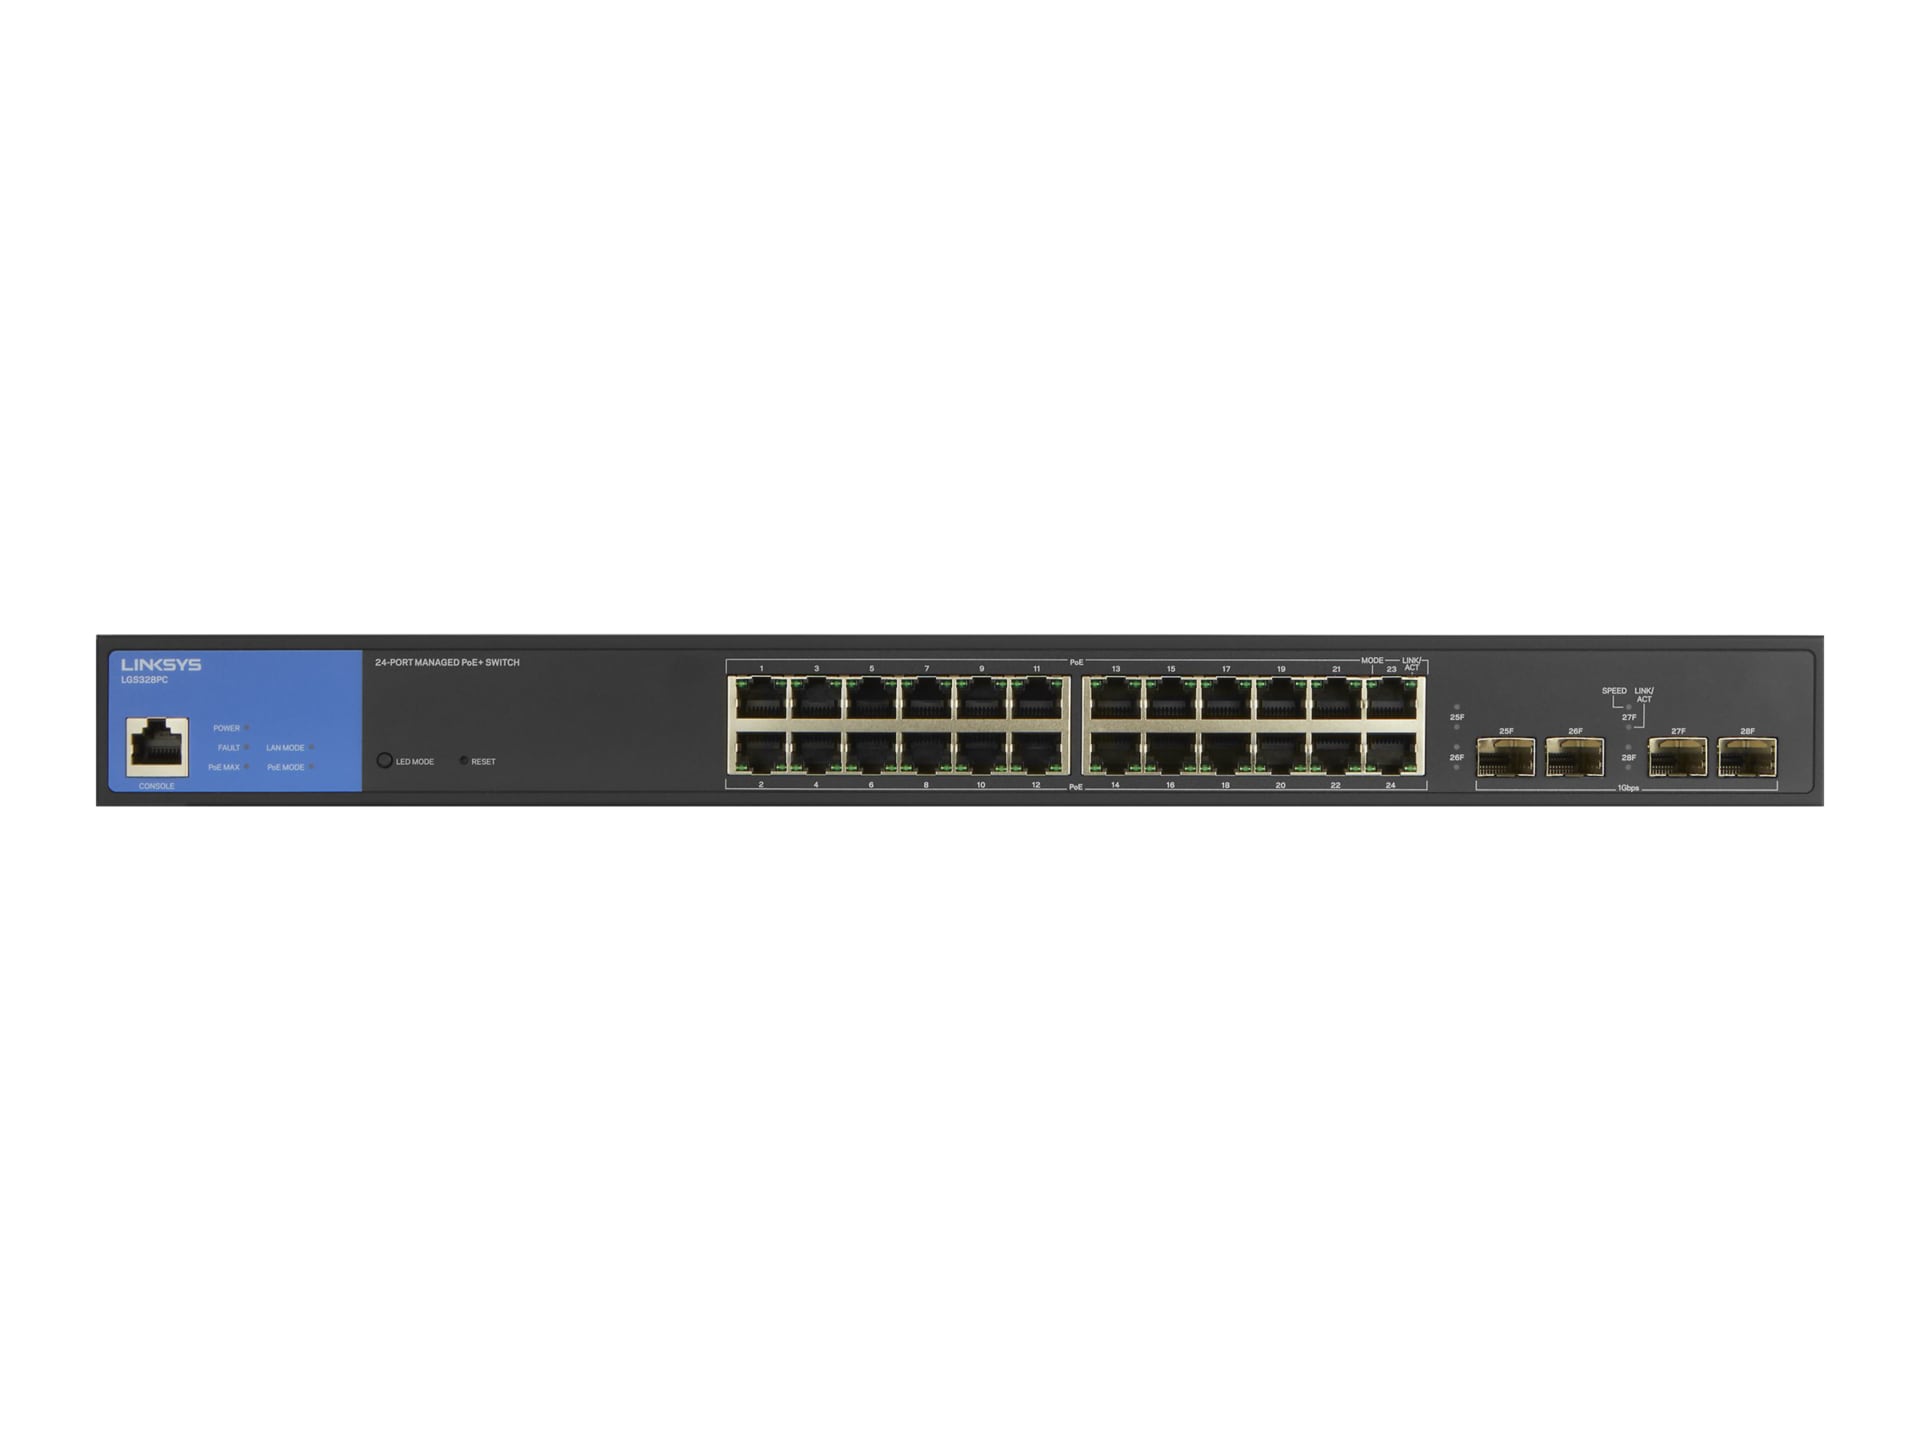 Linksys LGS328PC - switch - 24 ports - managed - TAA Compliant